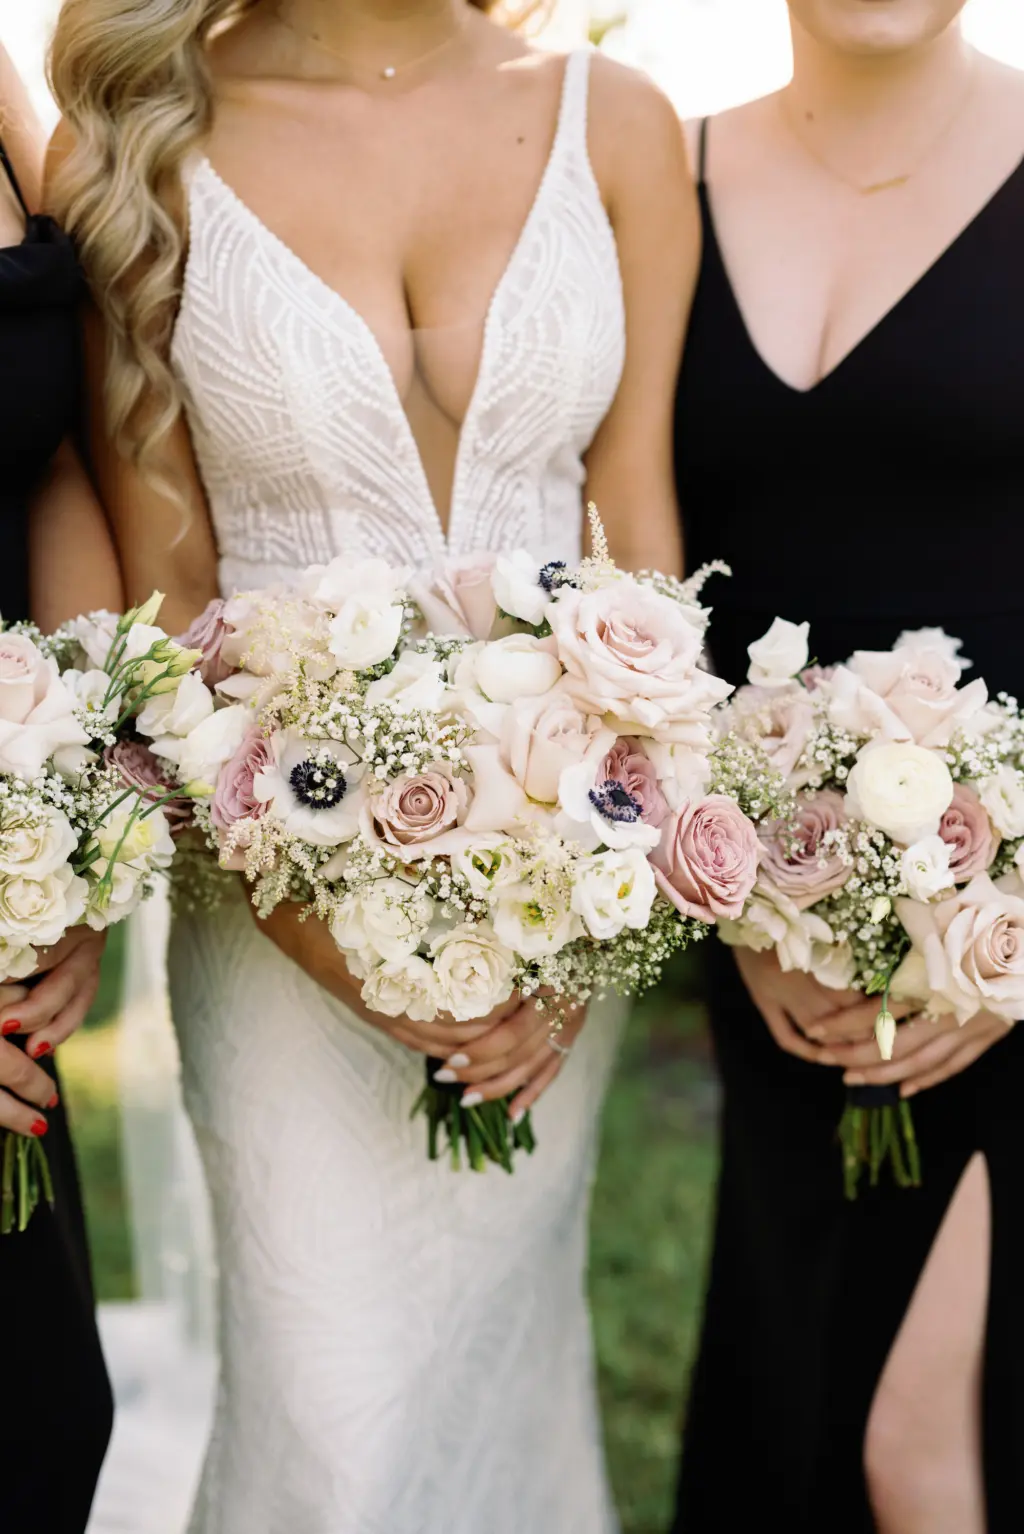 Pink Roses, White Anemones, and Baby's Breath Bridal Wedding Bouquet Inspiration